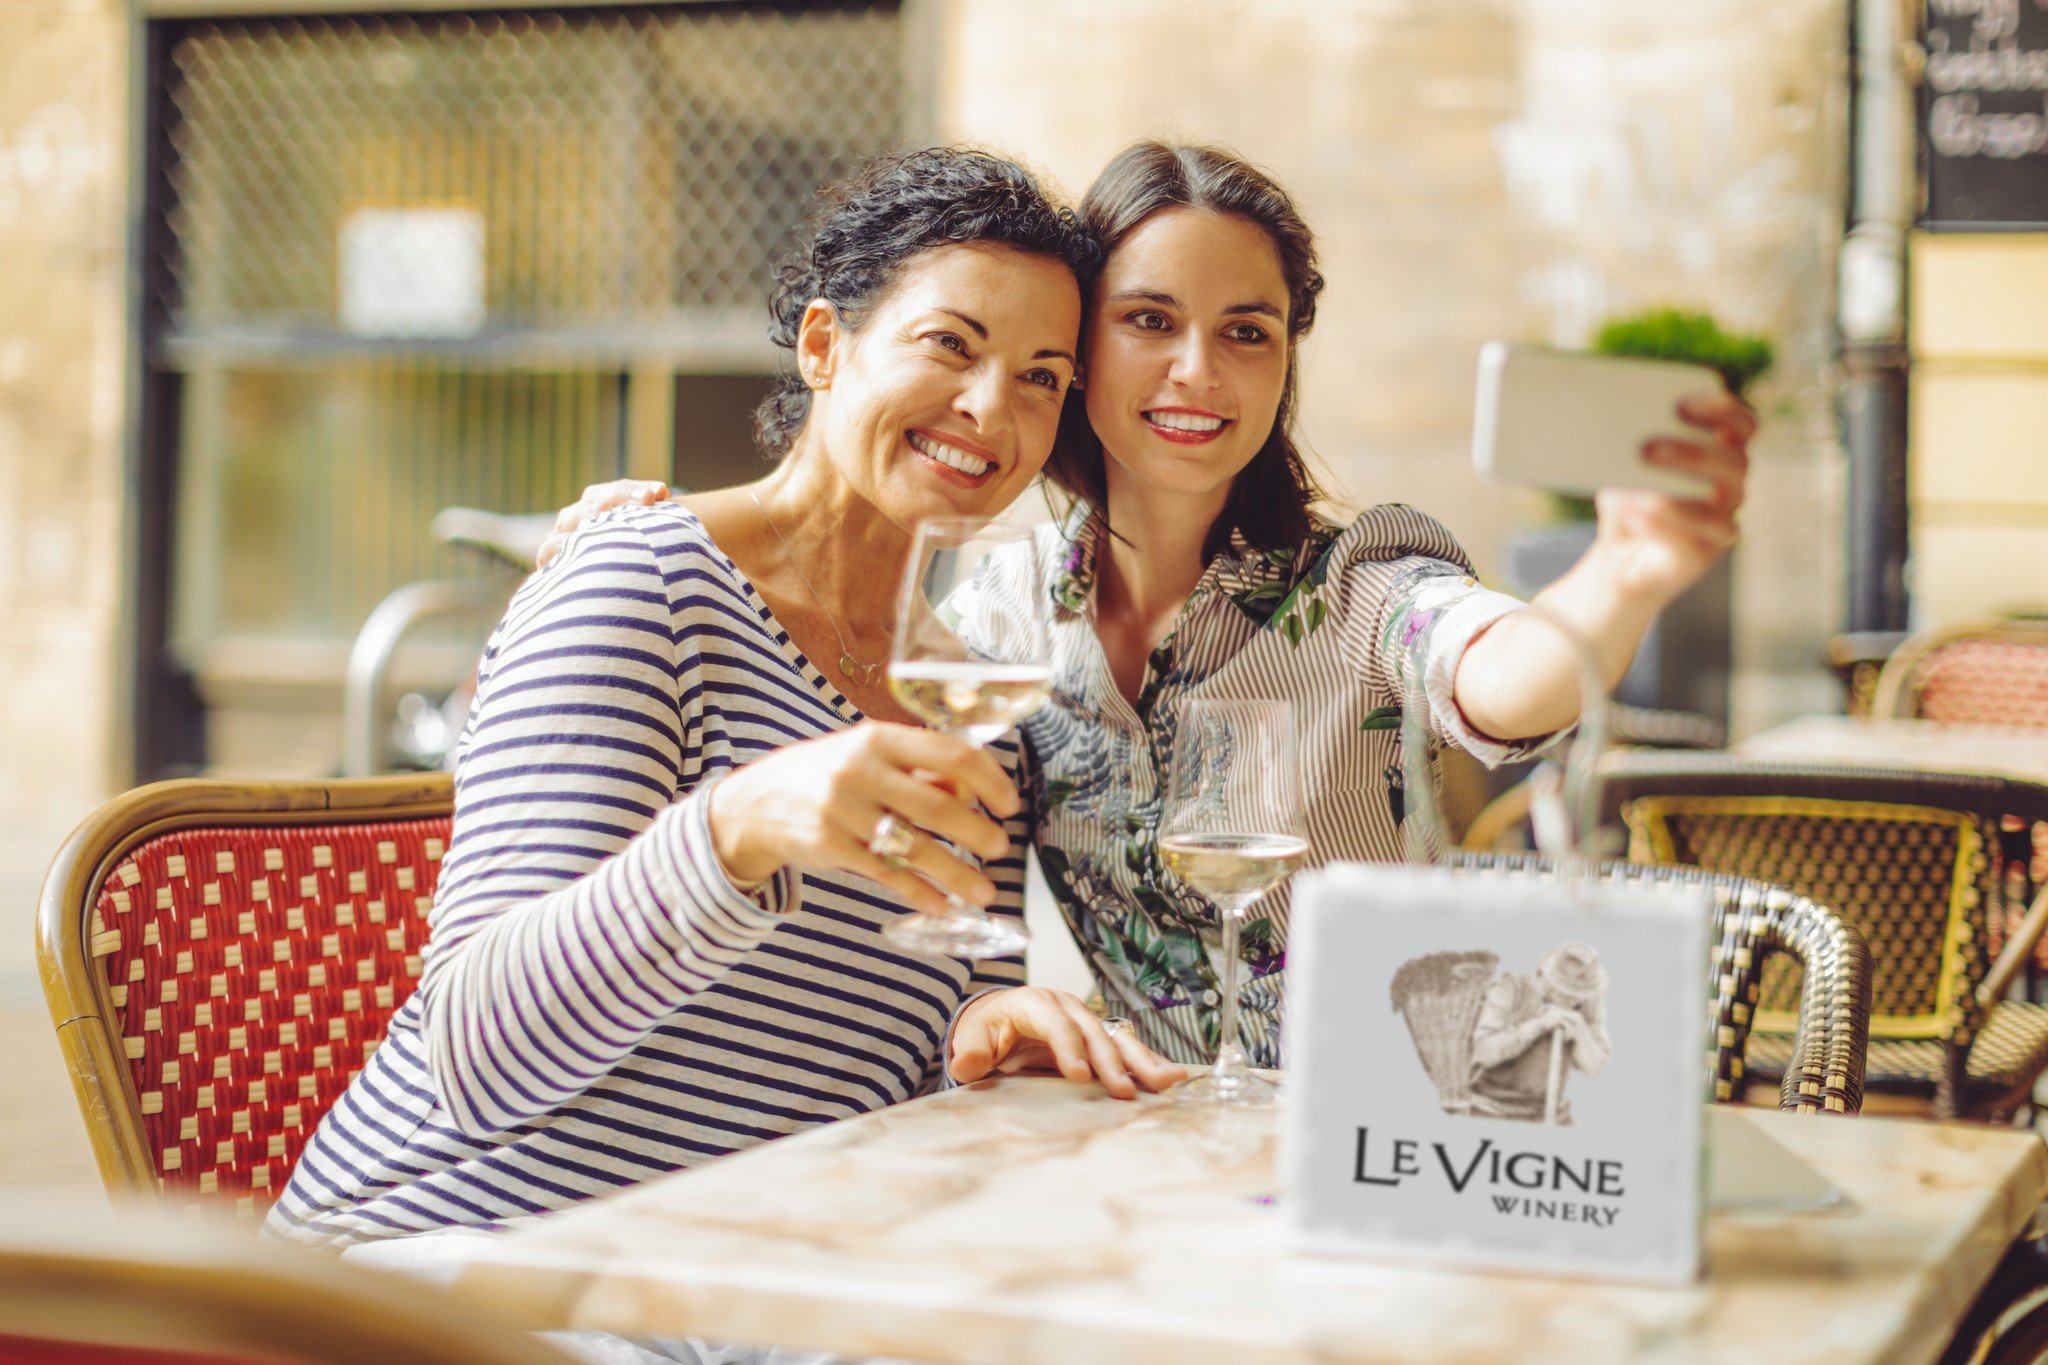 Treat Mom to a memorable Mother&rsquo;s Day experience at Le Vigne Winery&rsquo;s Mother&rsquo;s Day brunch prepared by our very own, Chef Walter Filippini in Paso Robles. Join us on Sunday, May 12th, from 11:30 am to 3 pm for a delicious brunch cele